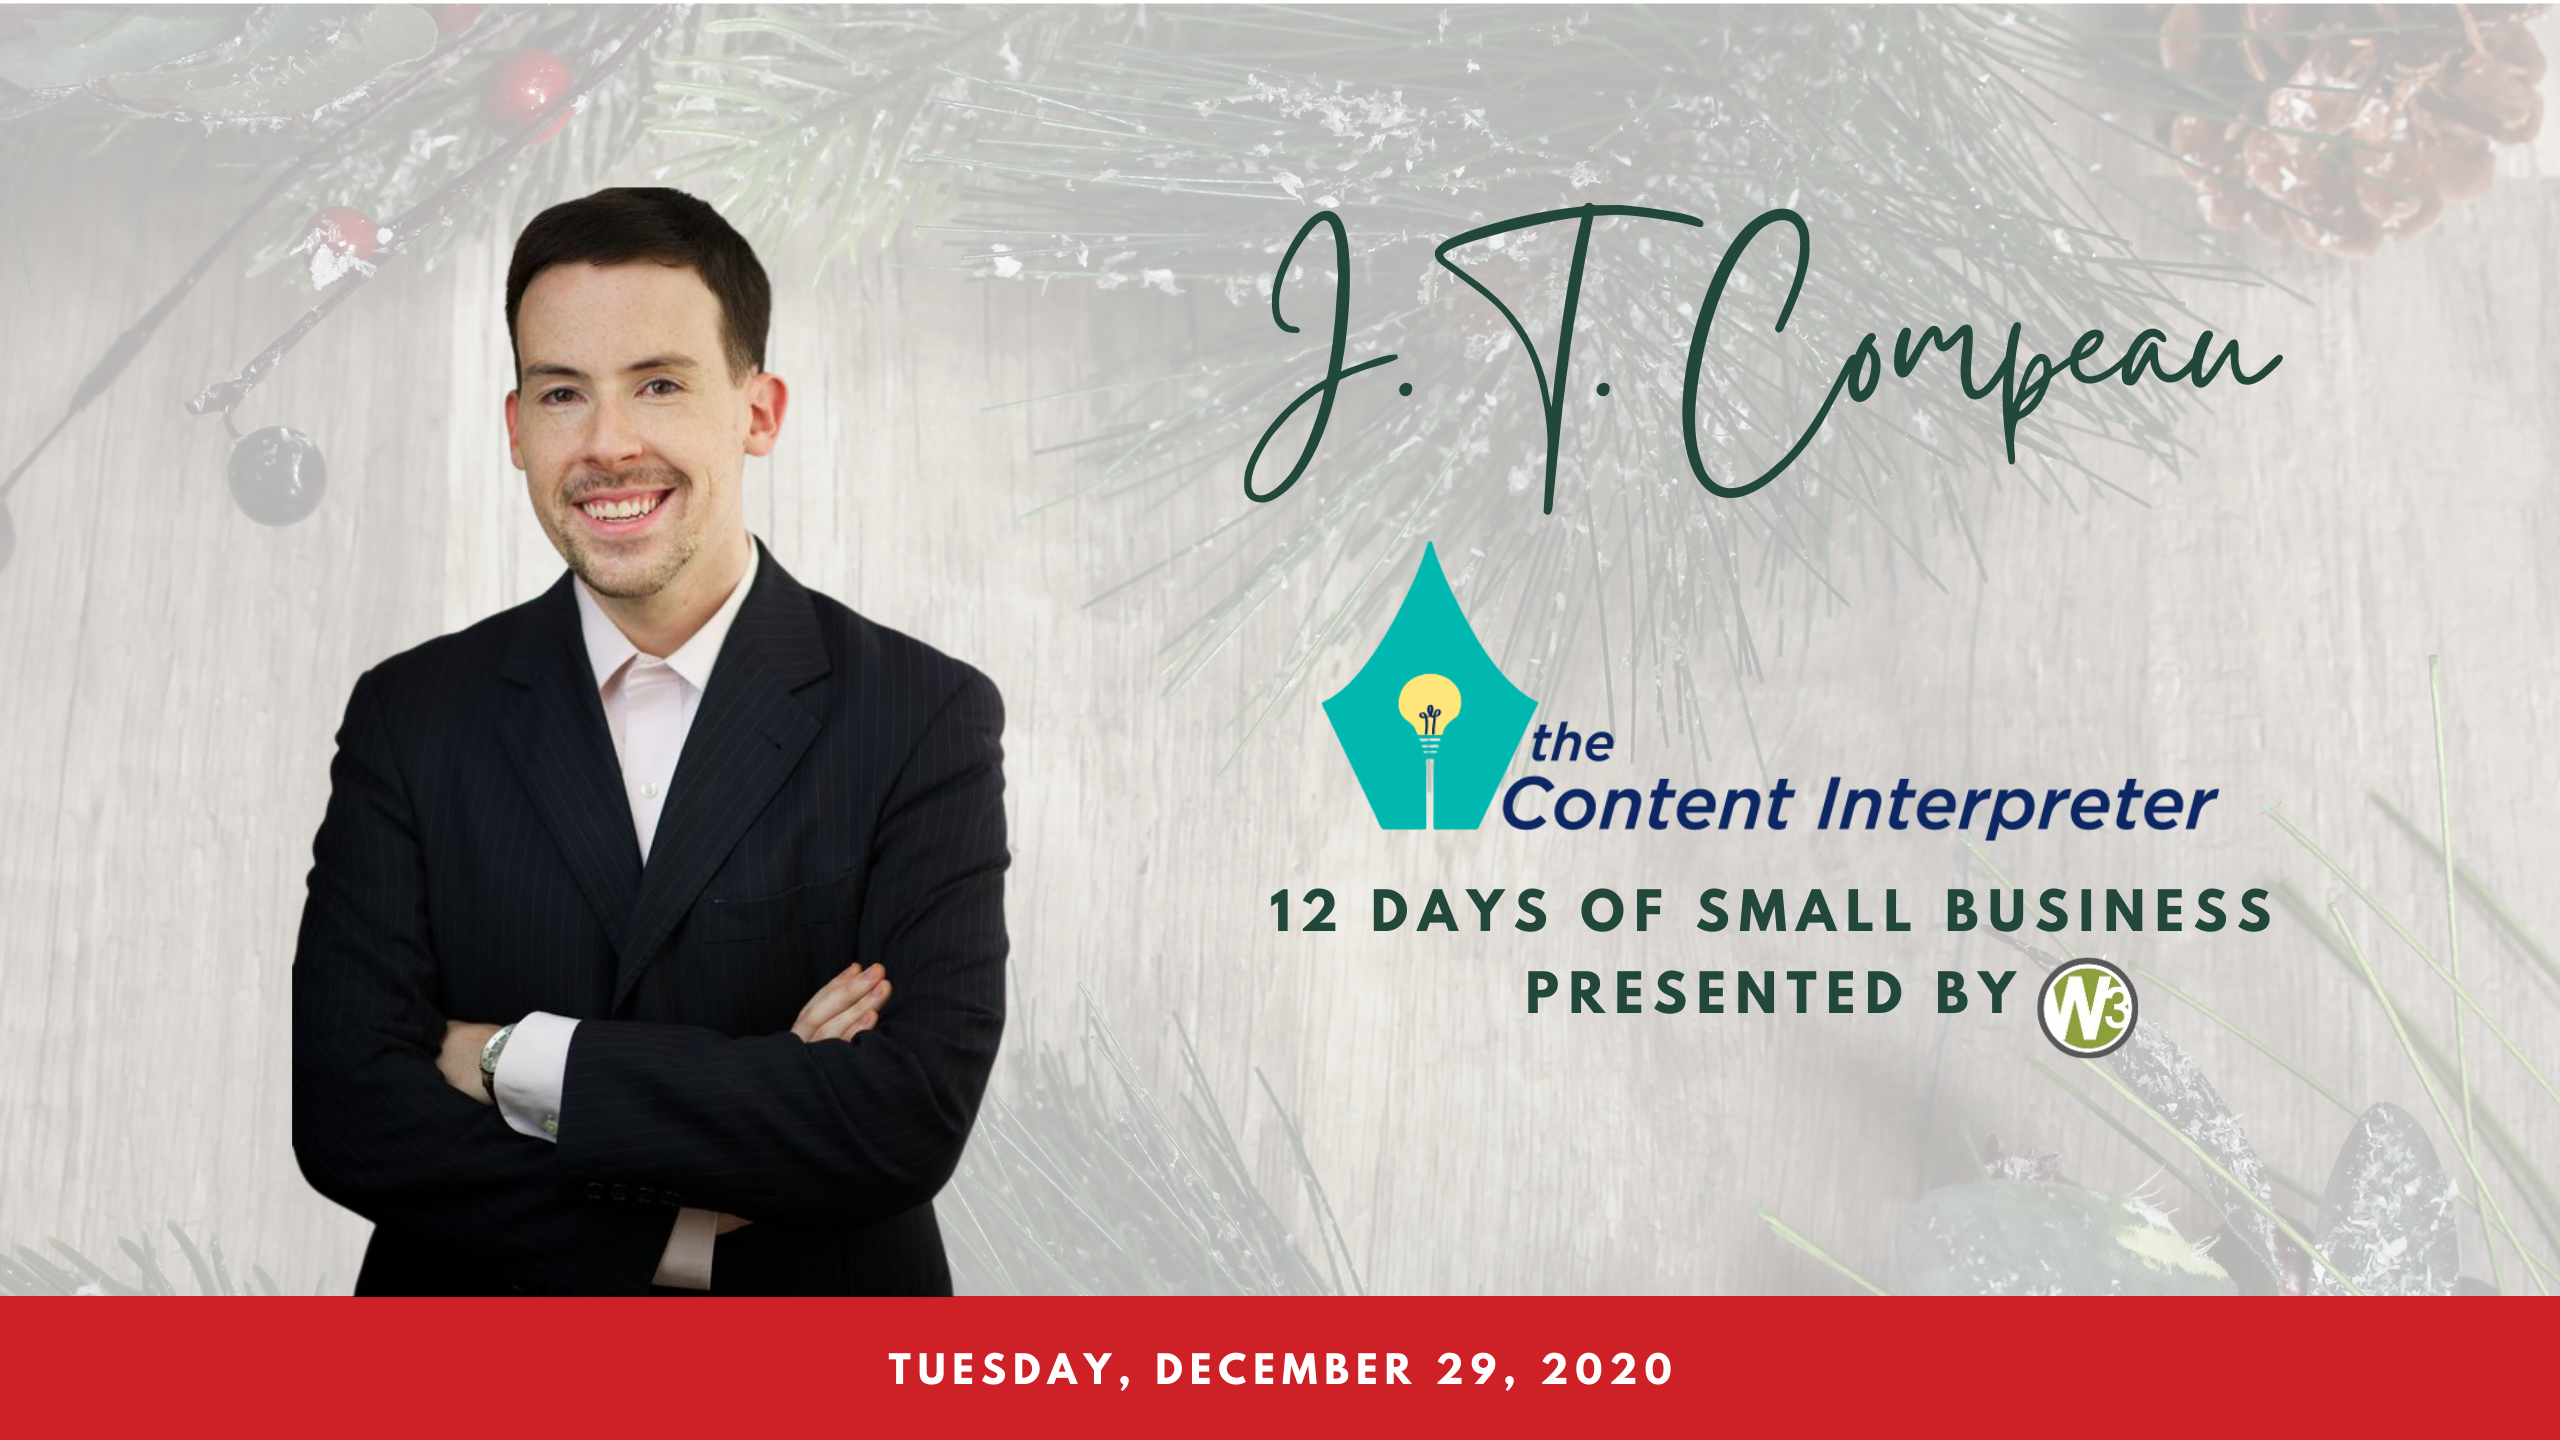 J.T. Compeau - The Content Interpreter - 12 Days of Small Business